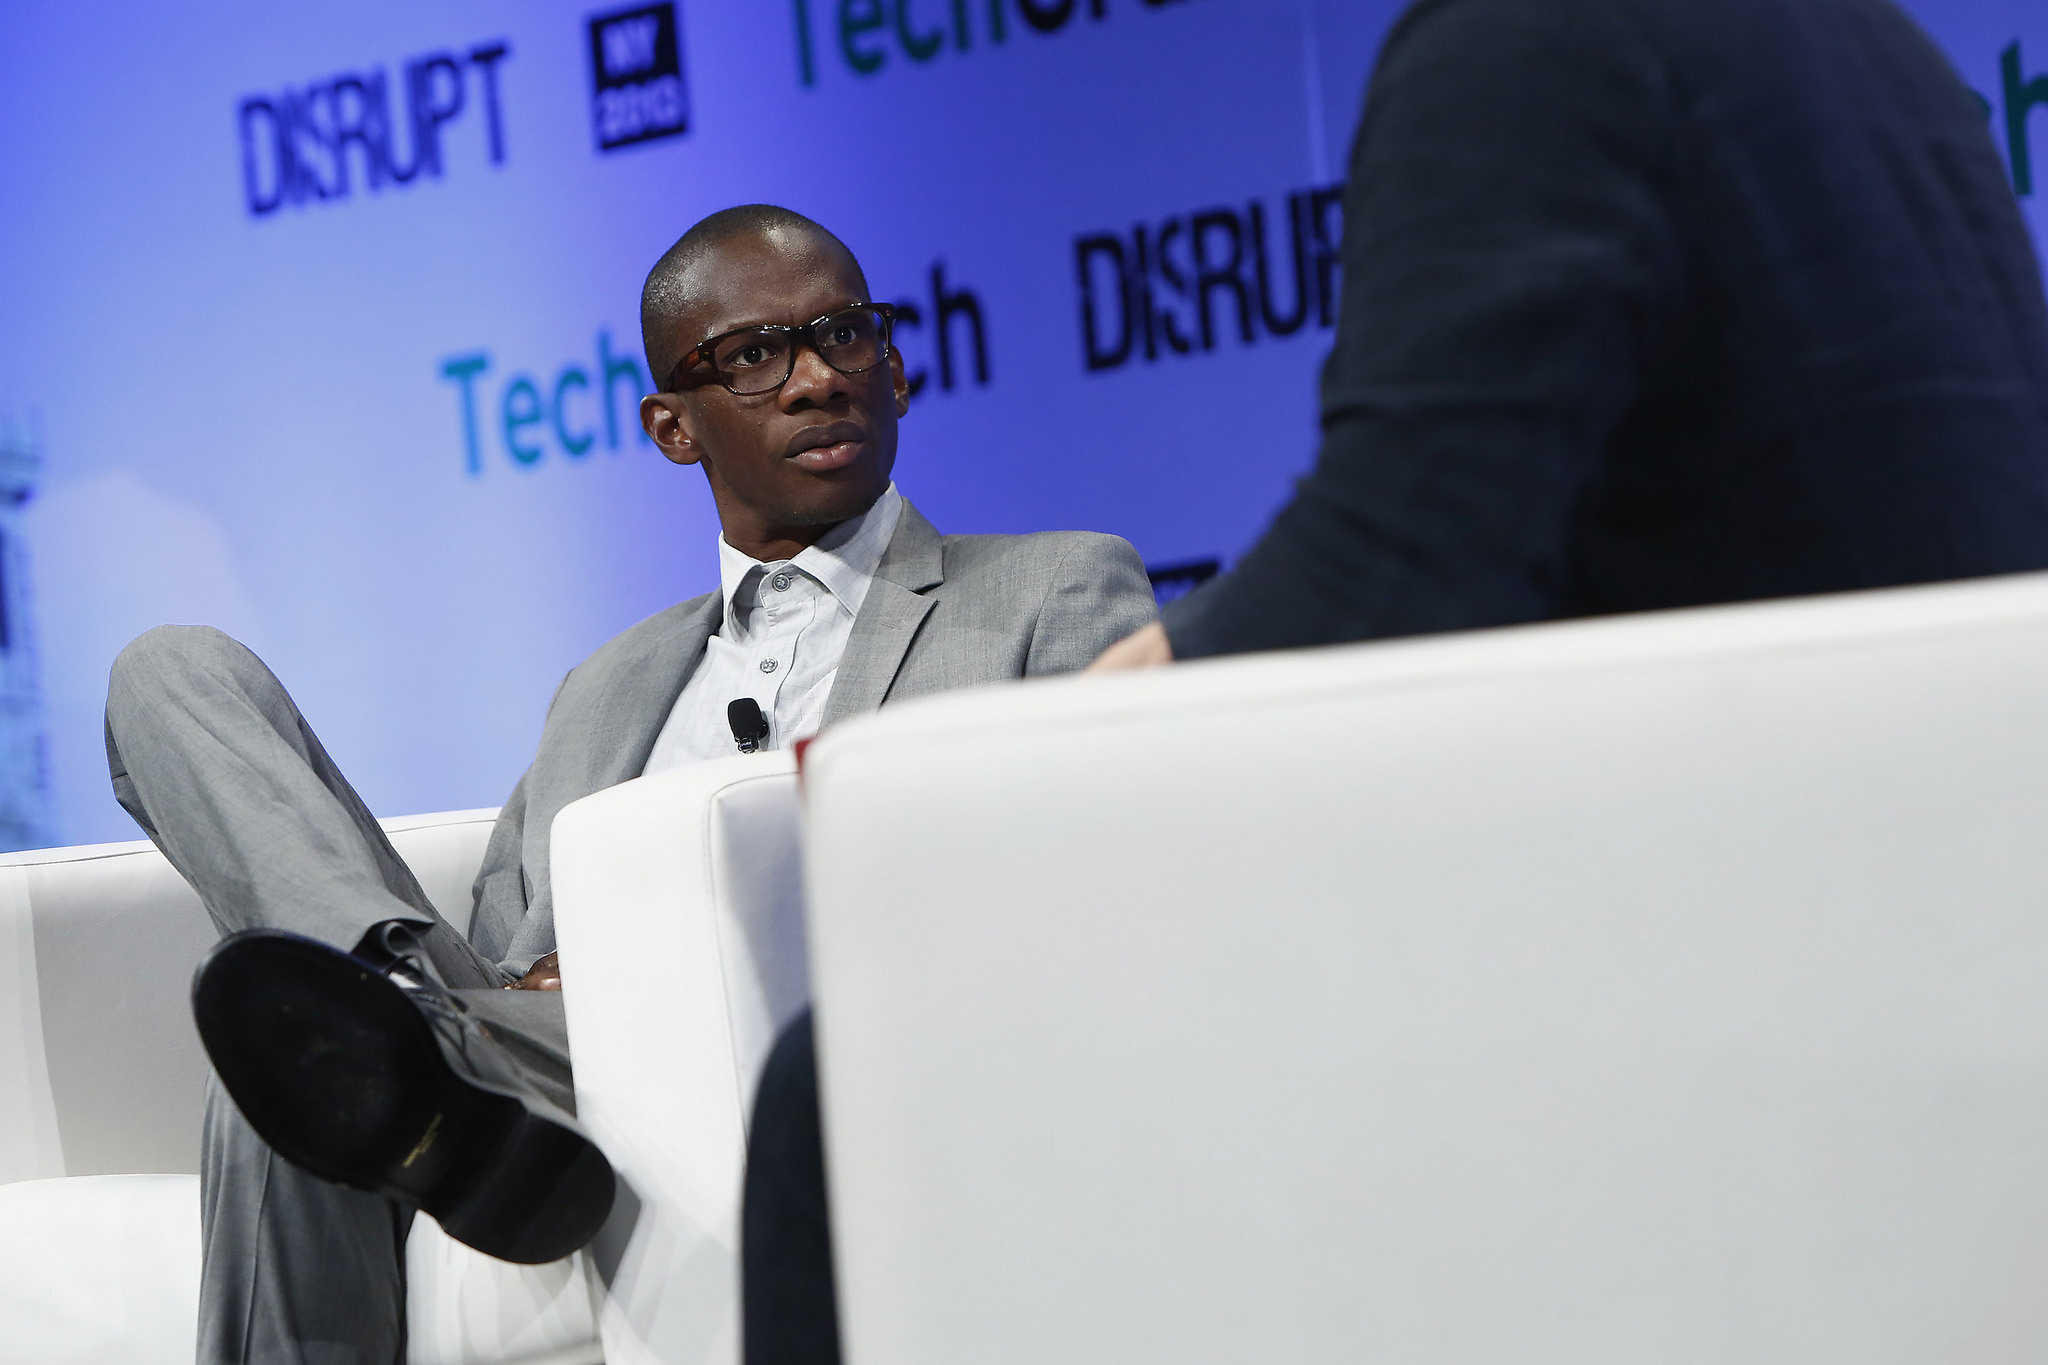 Troy Carter is bringing his talents to Spotify.